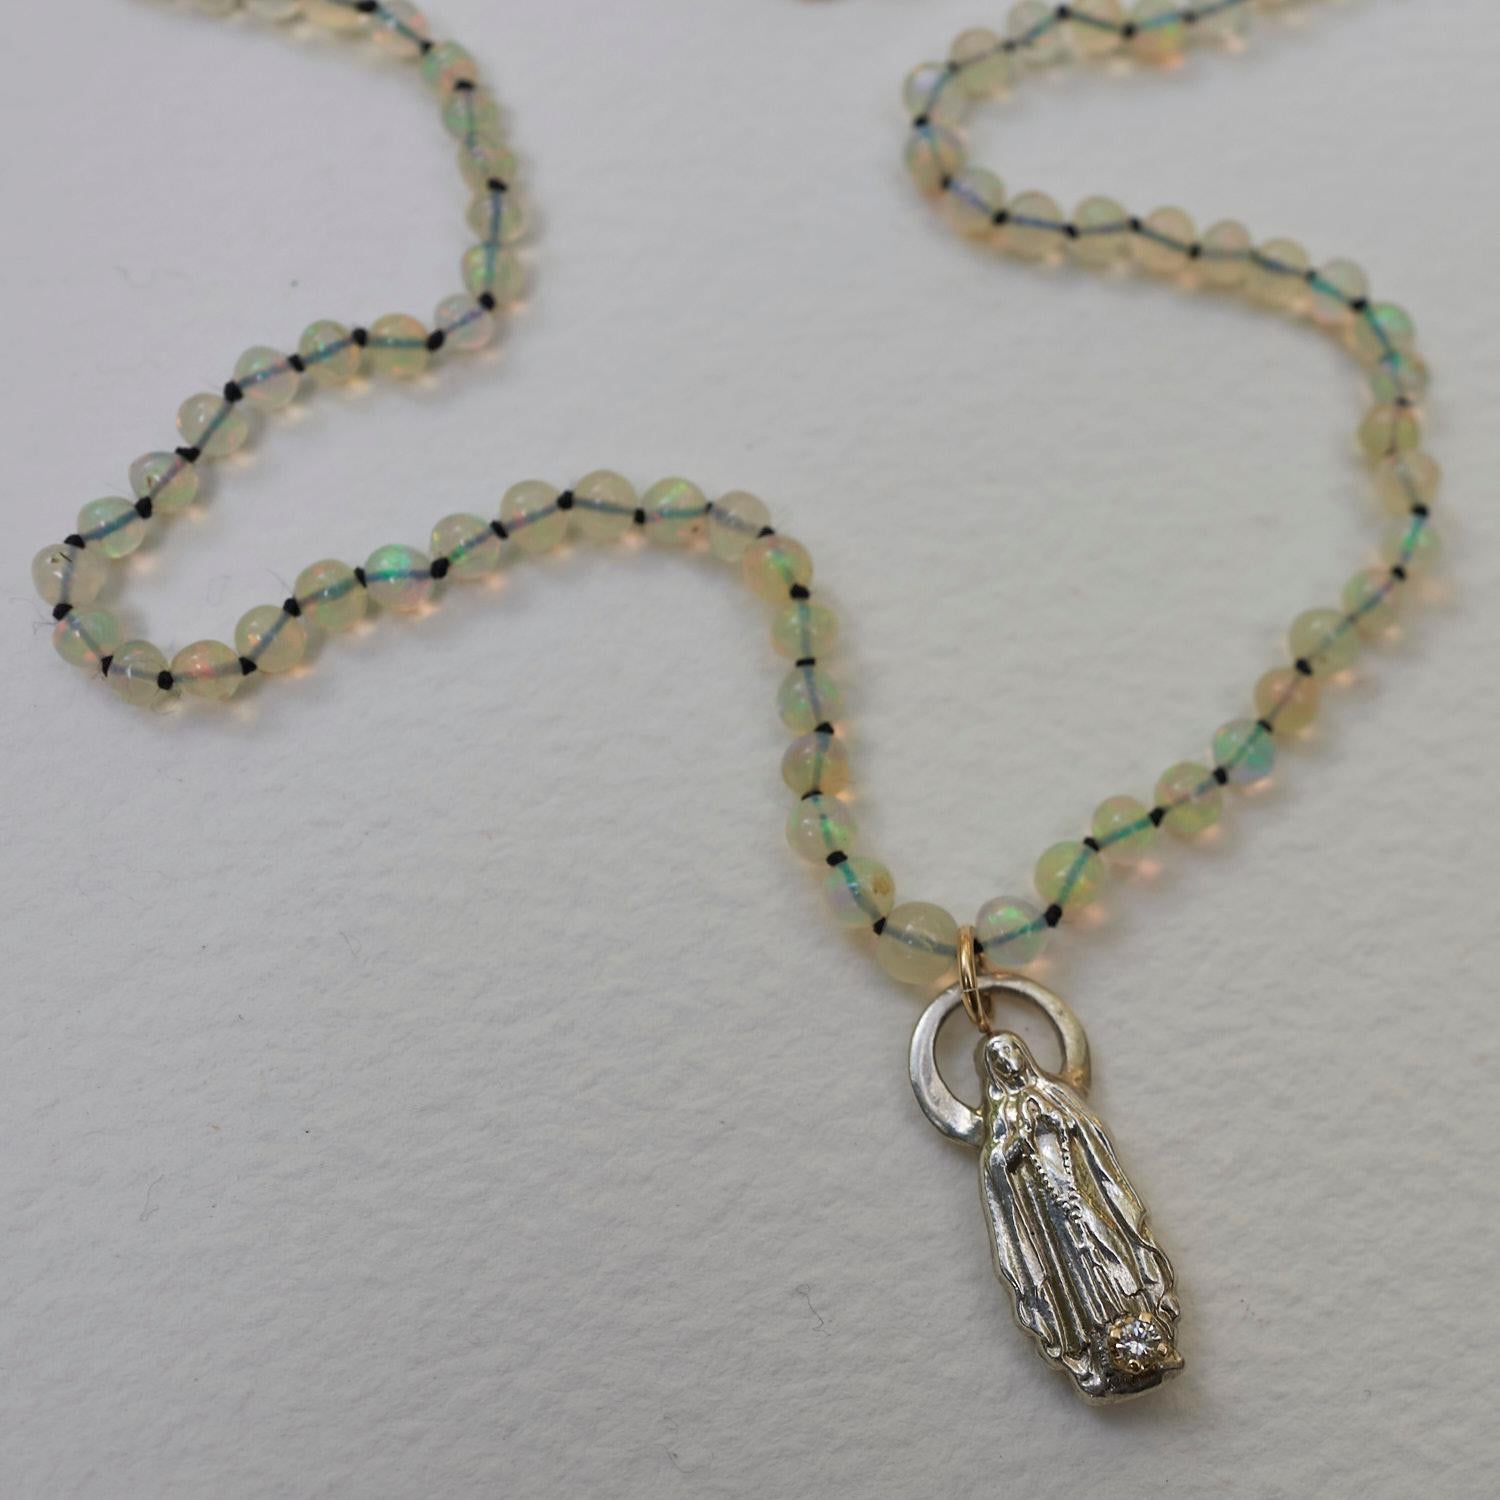 Brilliant Cut Egyptian Opal White Diamond Choker Necklace Solid Silver Virgin Mary J Dauphin For Sale